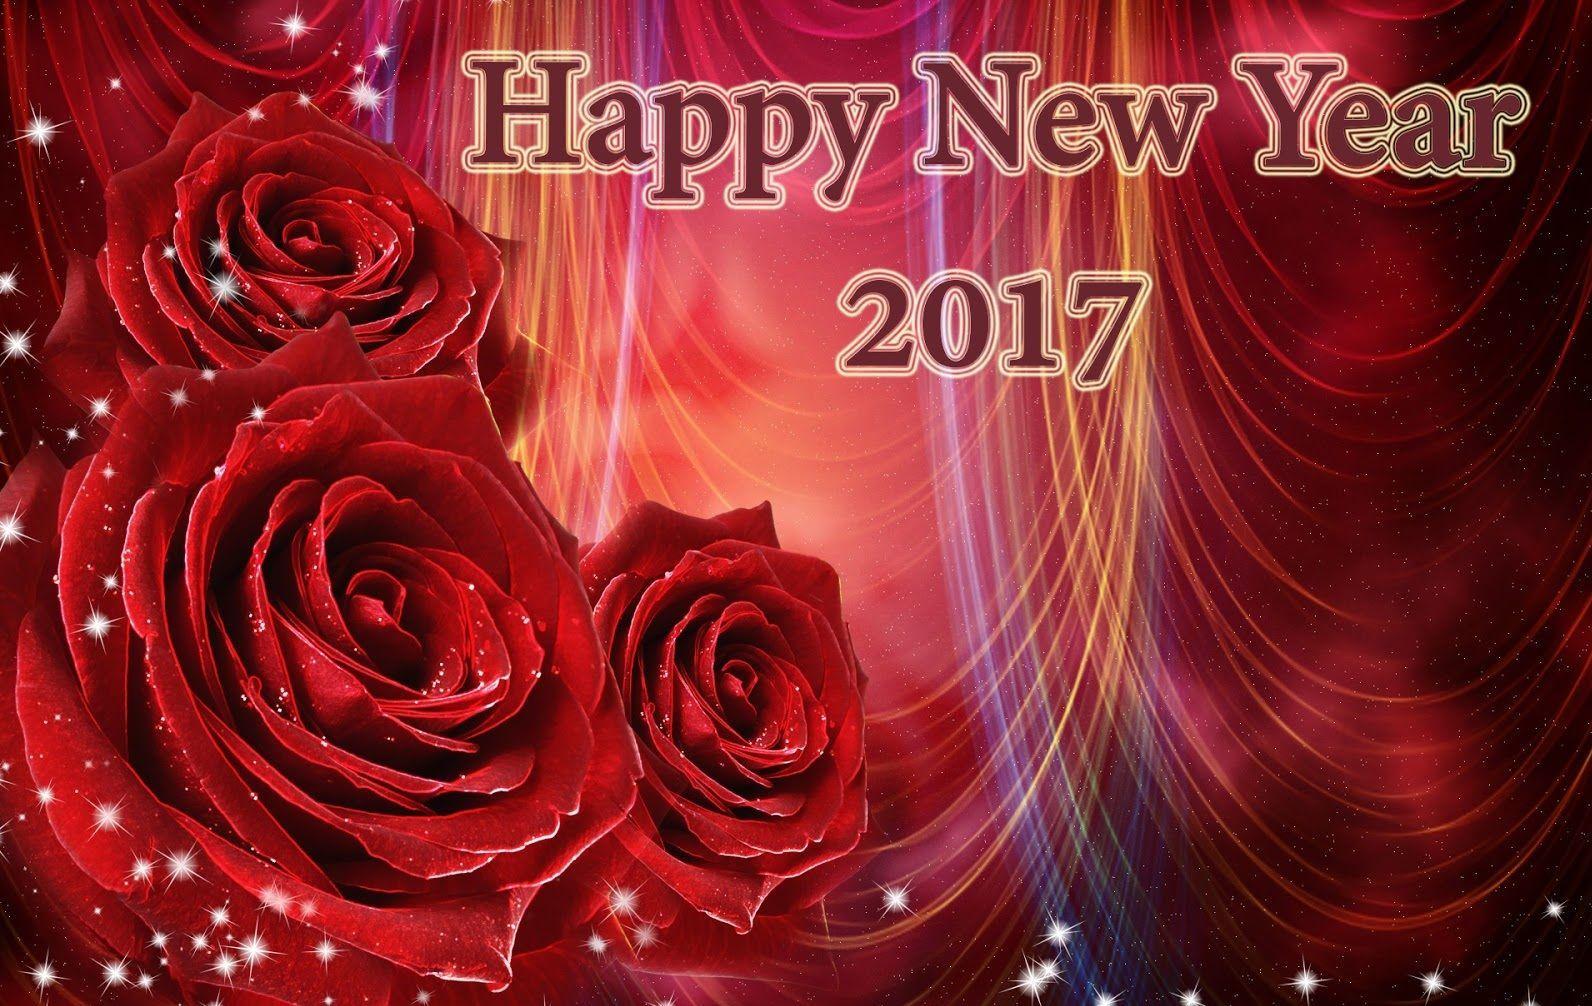 Celebrate New Year 2017 with Happy New Year latest Wallpaper